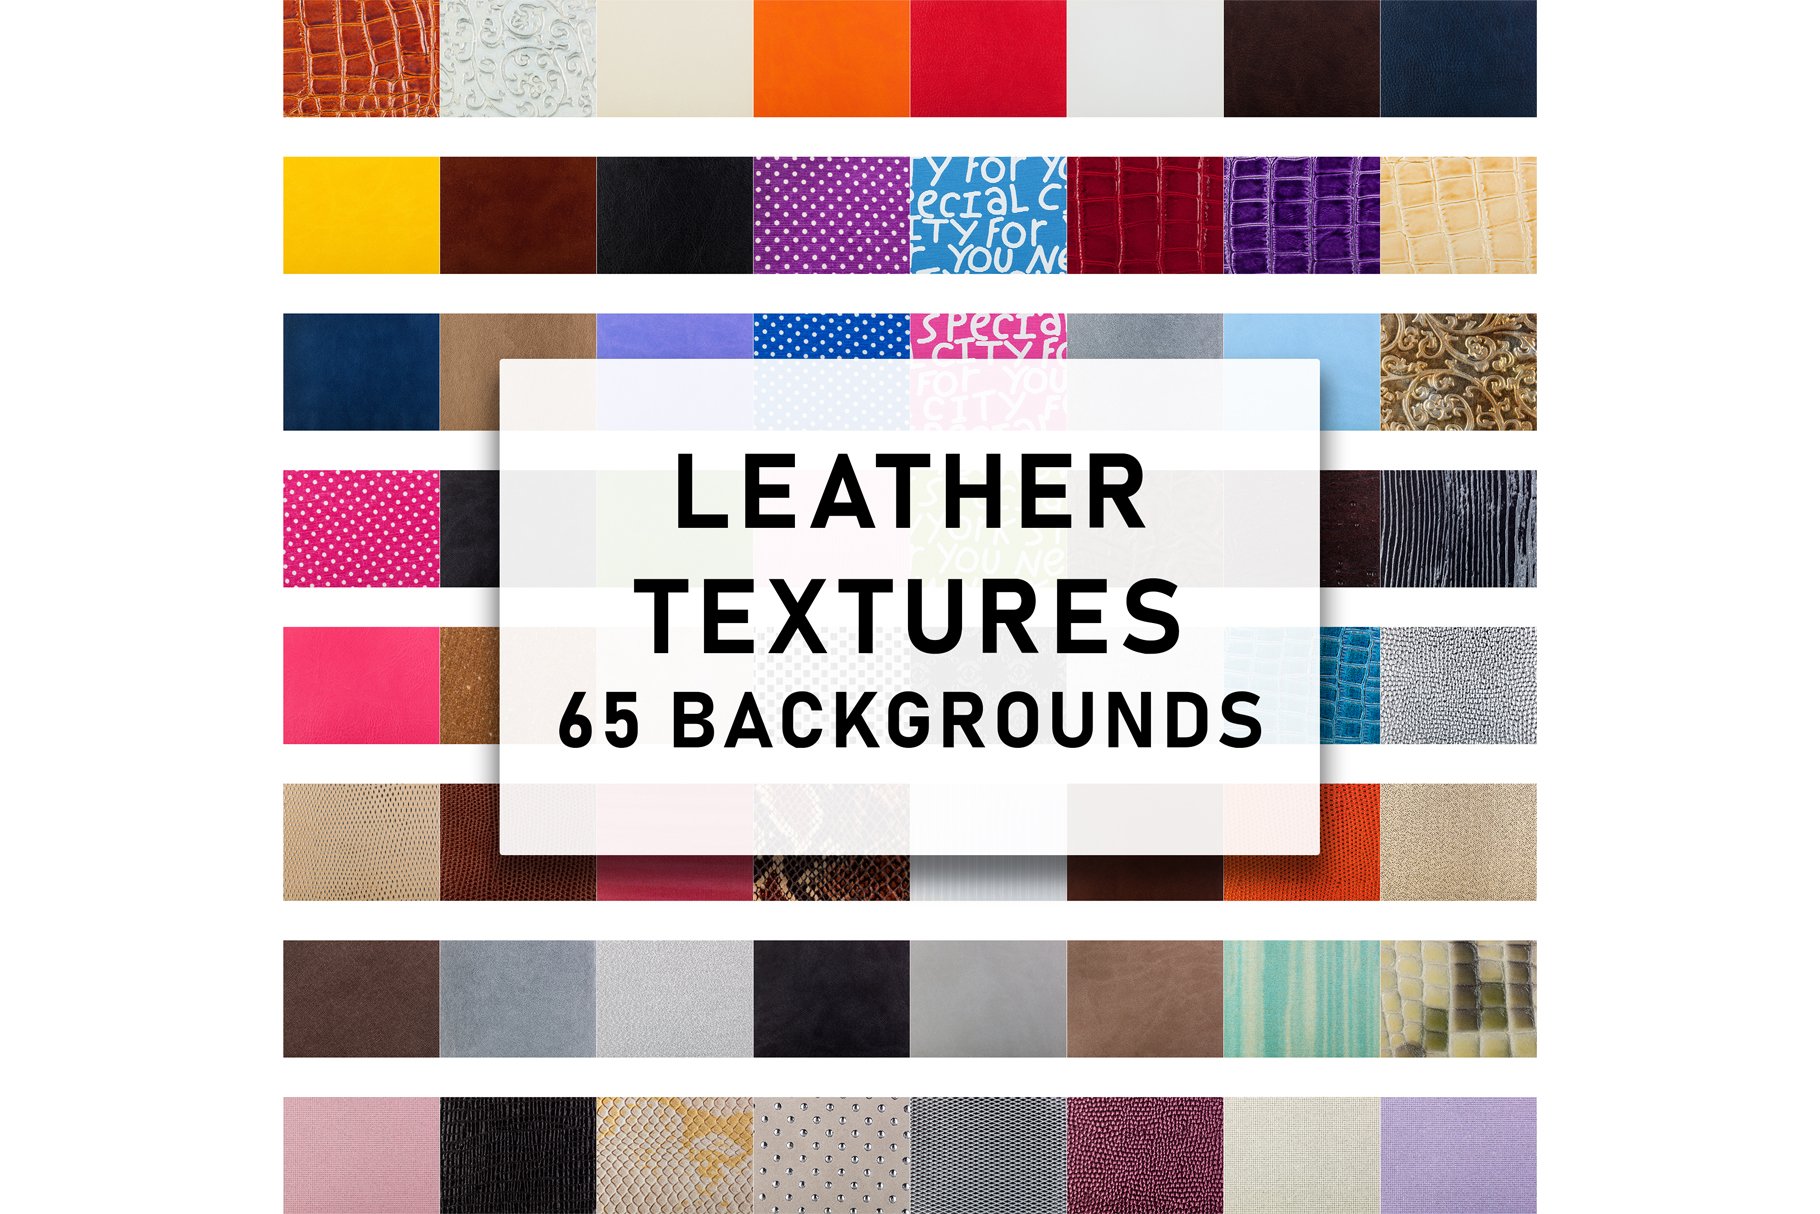 Leather Textures 65 patterns cover image.